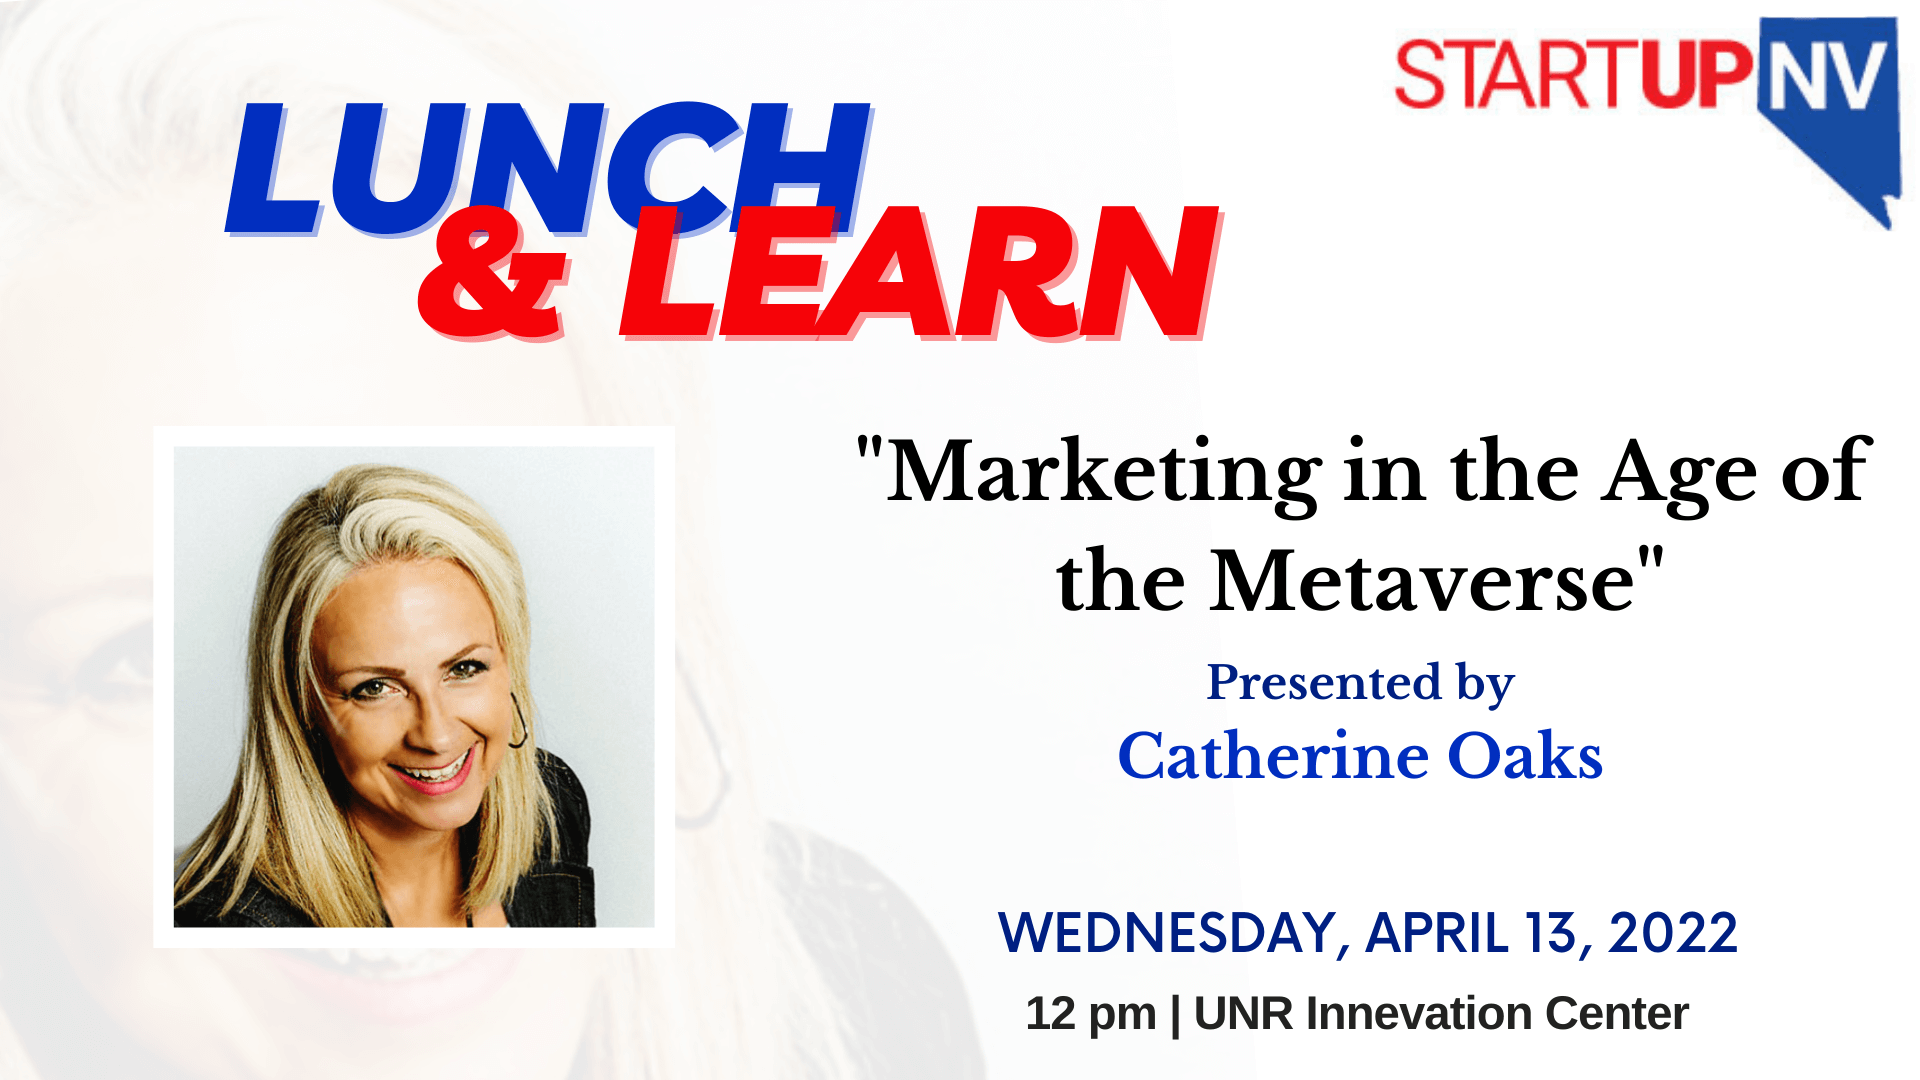 Lunch and Learn by Catherine Oaks marketing sizing template